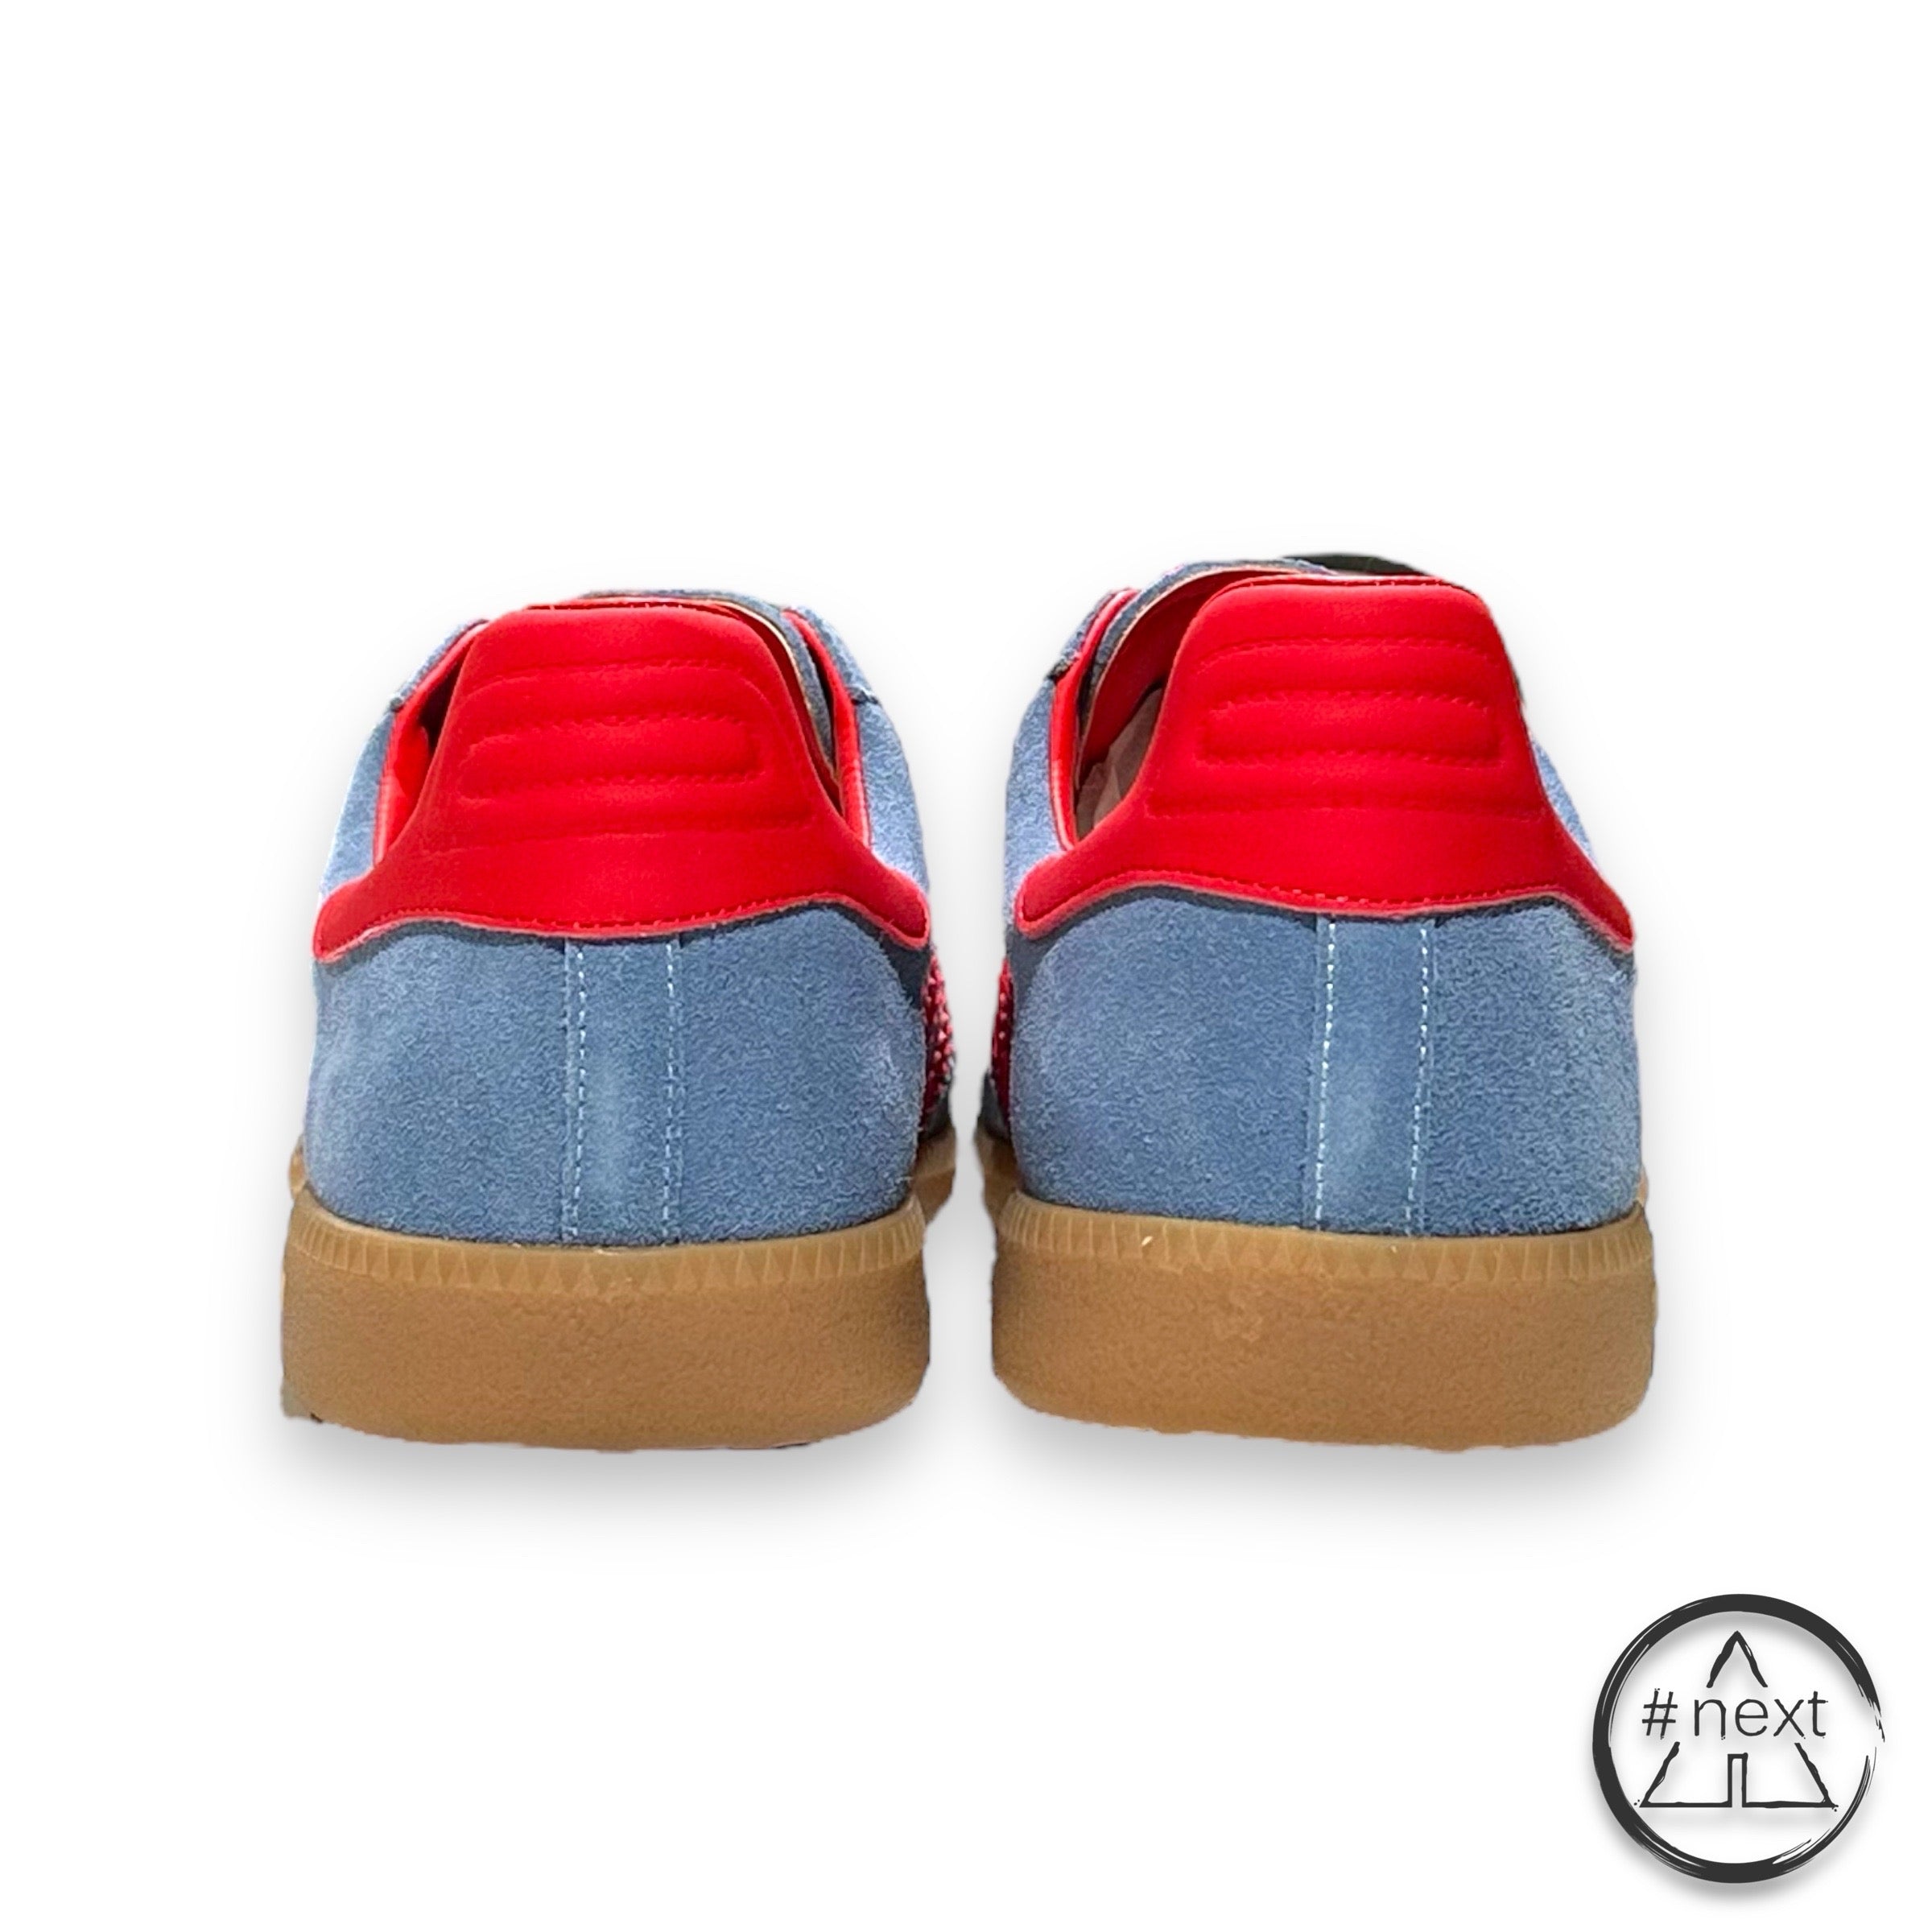 (#C) BACK70 - Sneakers CLOUD - Jeans, rosso - ANDY #NEXT